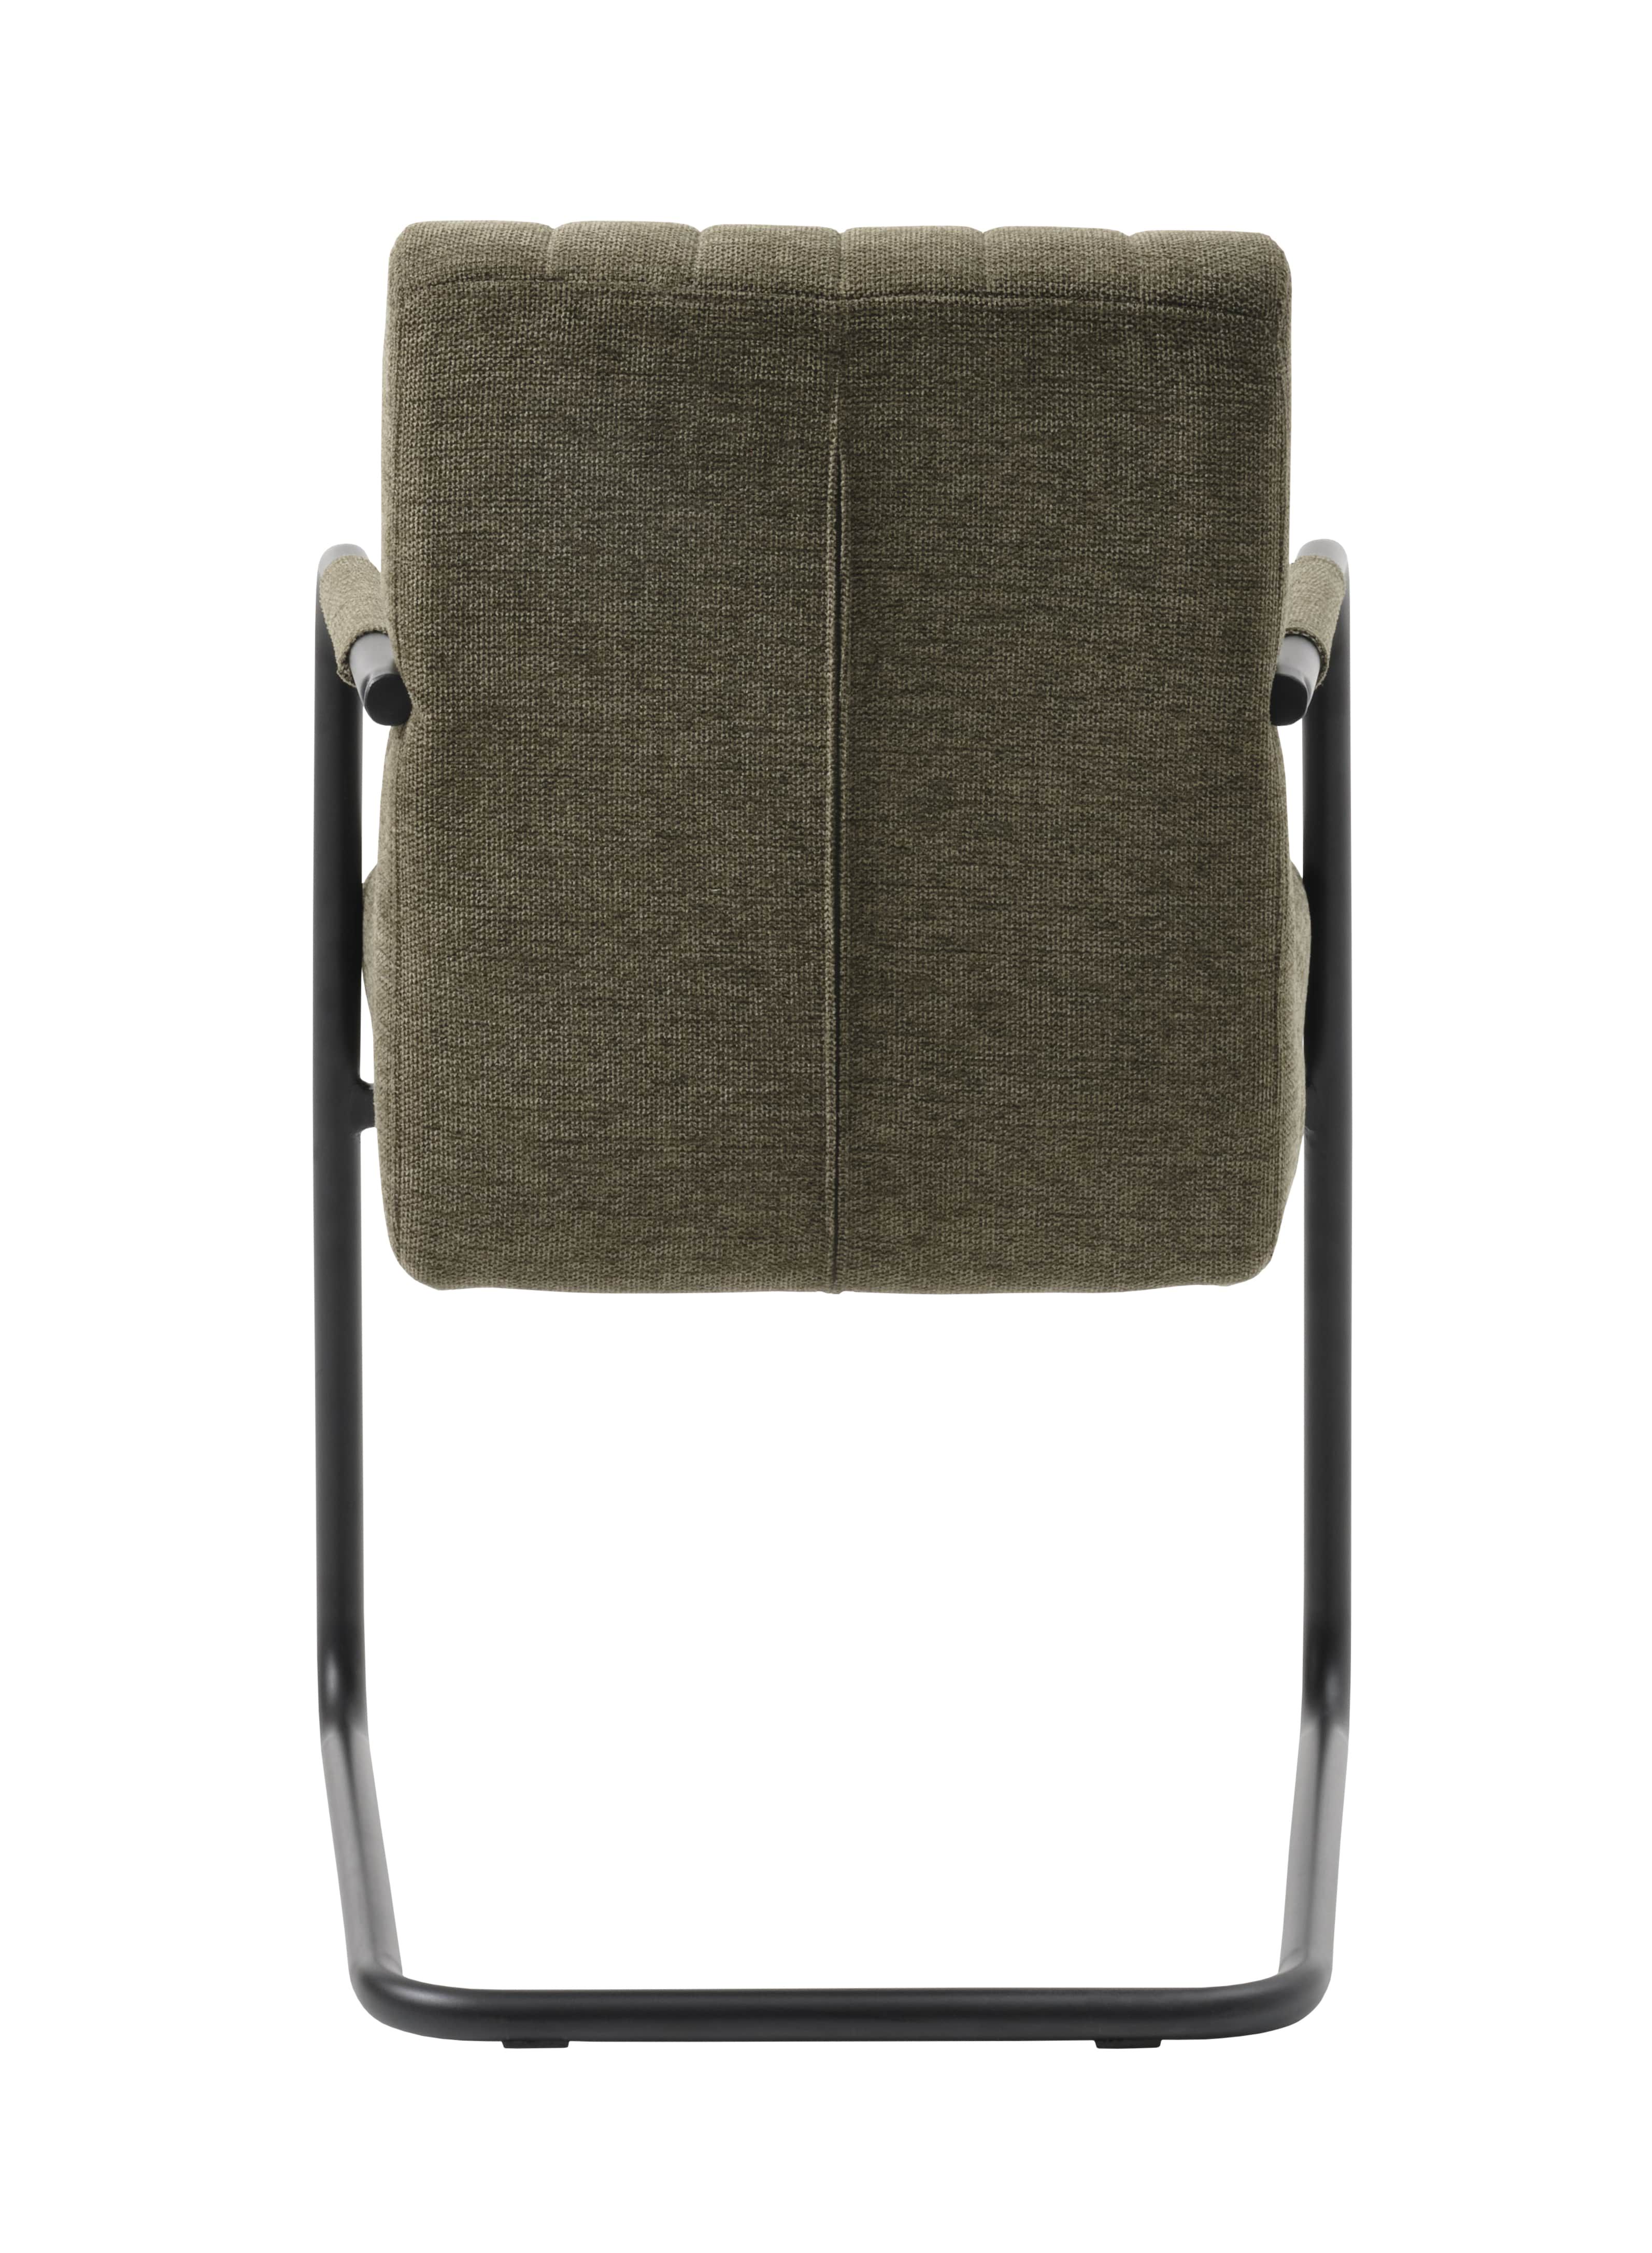 49490003 TROUT CHAIR OLIVE GREEN_5-min.jpg